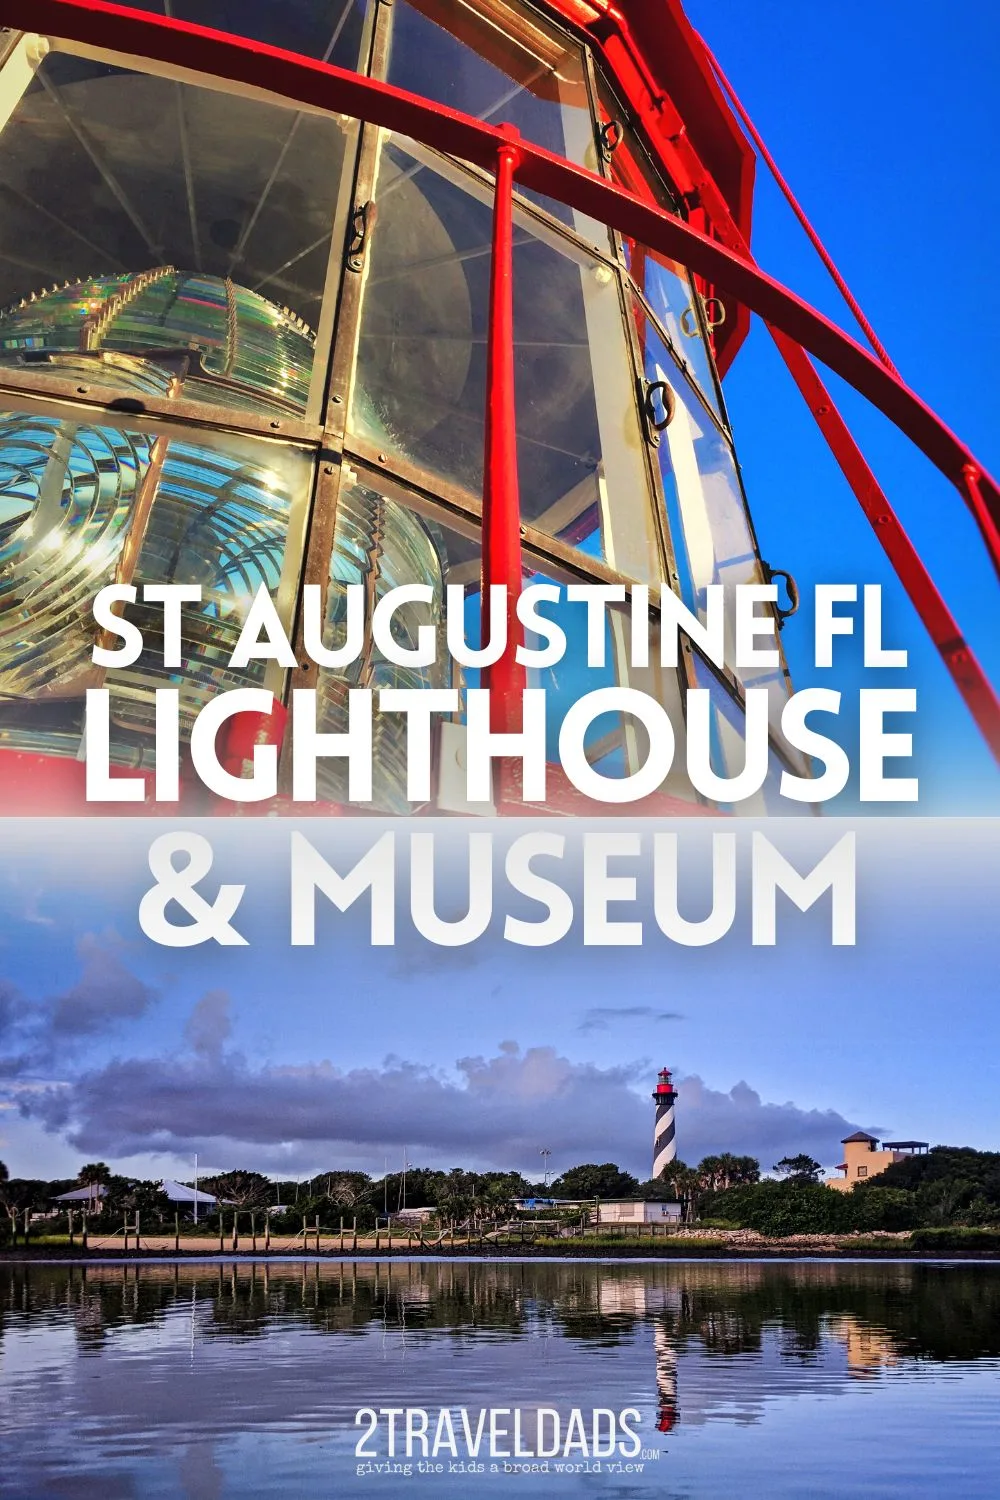 Visiting the St Augustine Lighthouse and Maritime Museum is one of the most popular things to do in America's oldest city. Details on how to climb to the top, what's in the museum and what to do near the St Augustine lighthouse.